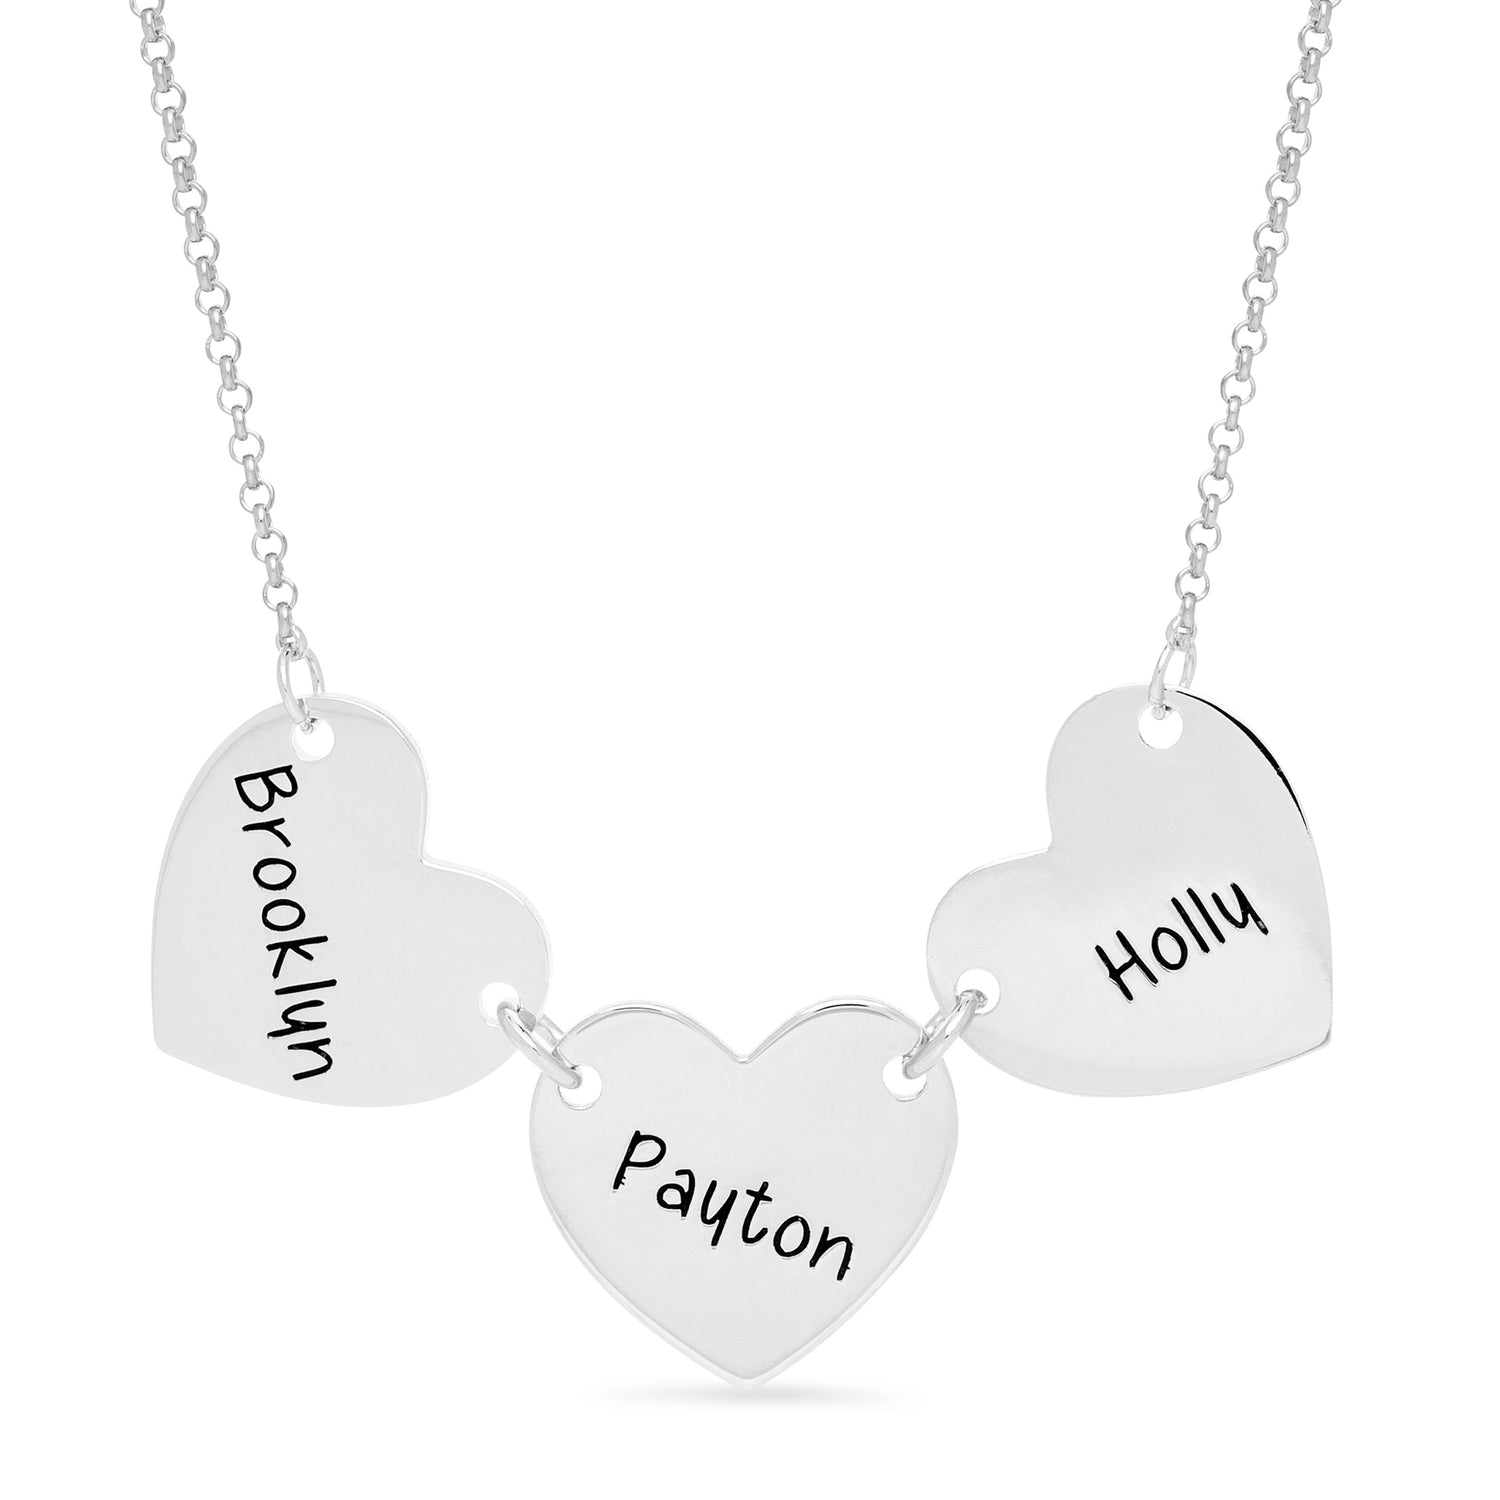 Heart Charm Necklace - 3 To 5 Charms